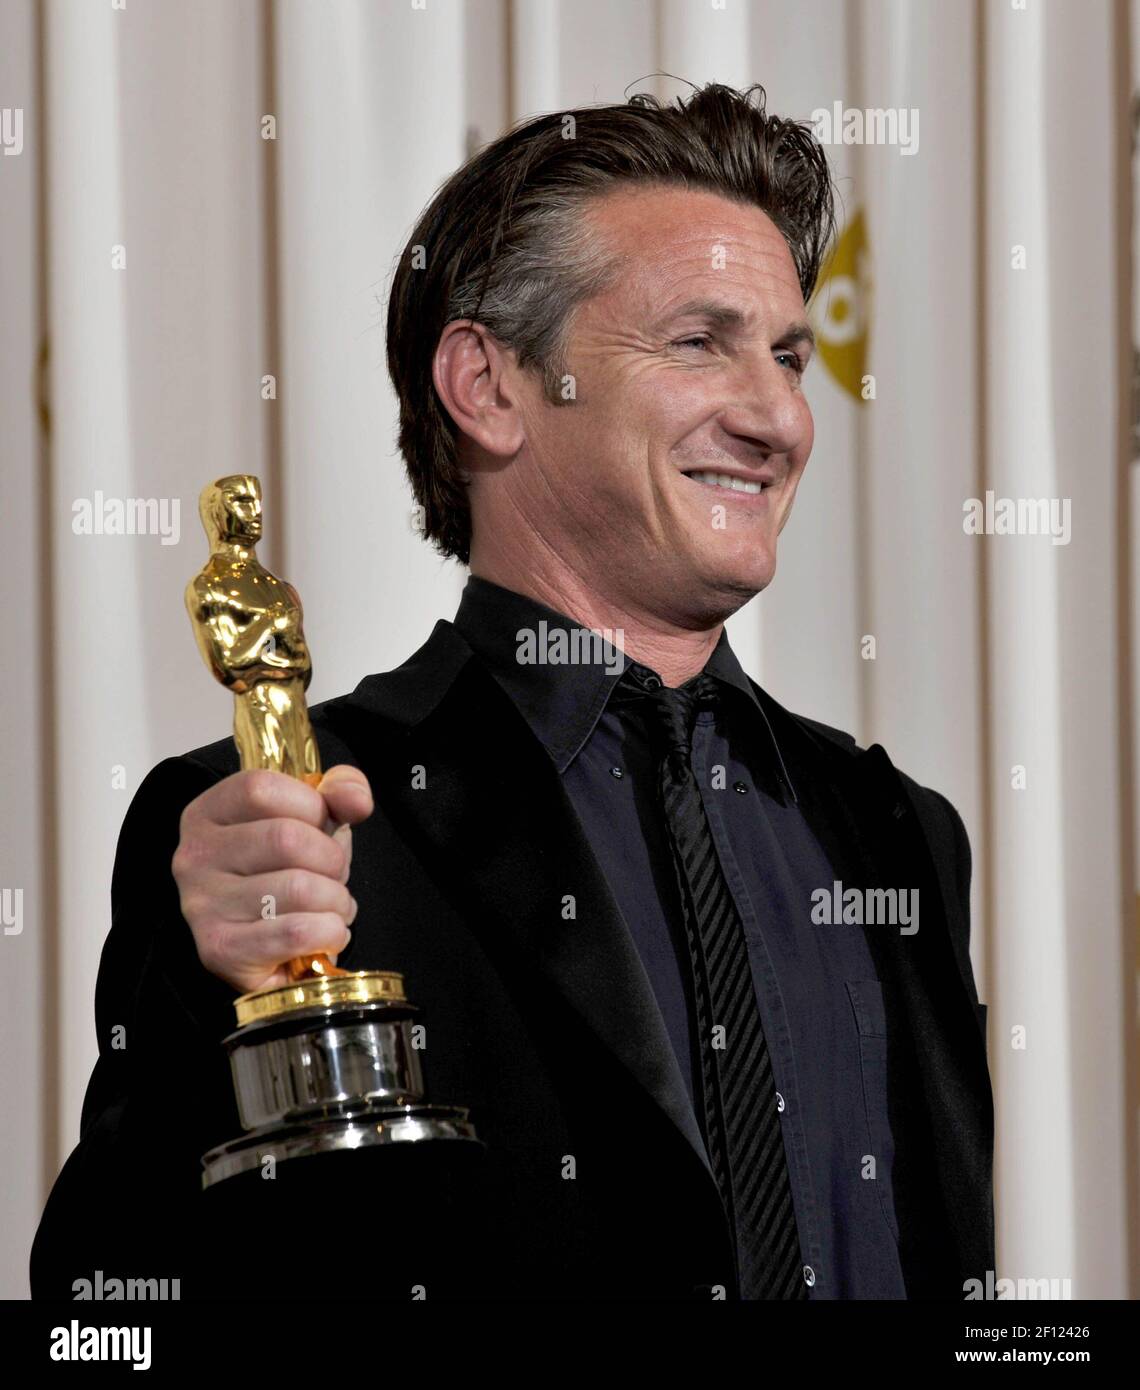 Sean Penn holds the award for best actor for his role in "Milk" at the 81st  annual Academy Awards in Hollywood, California, Sunday, February 22, 2009.  (Photo by Leonard Ortiz/Orange County Register/MCT/Sipa